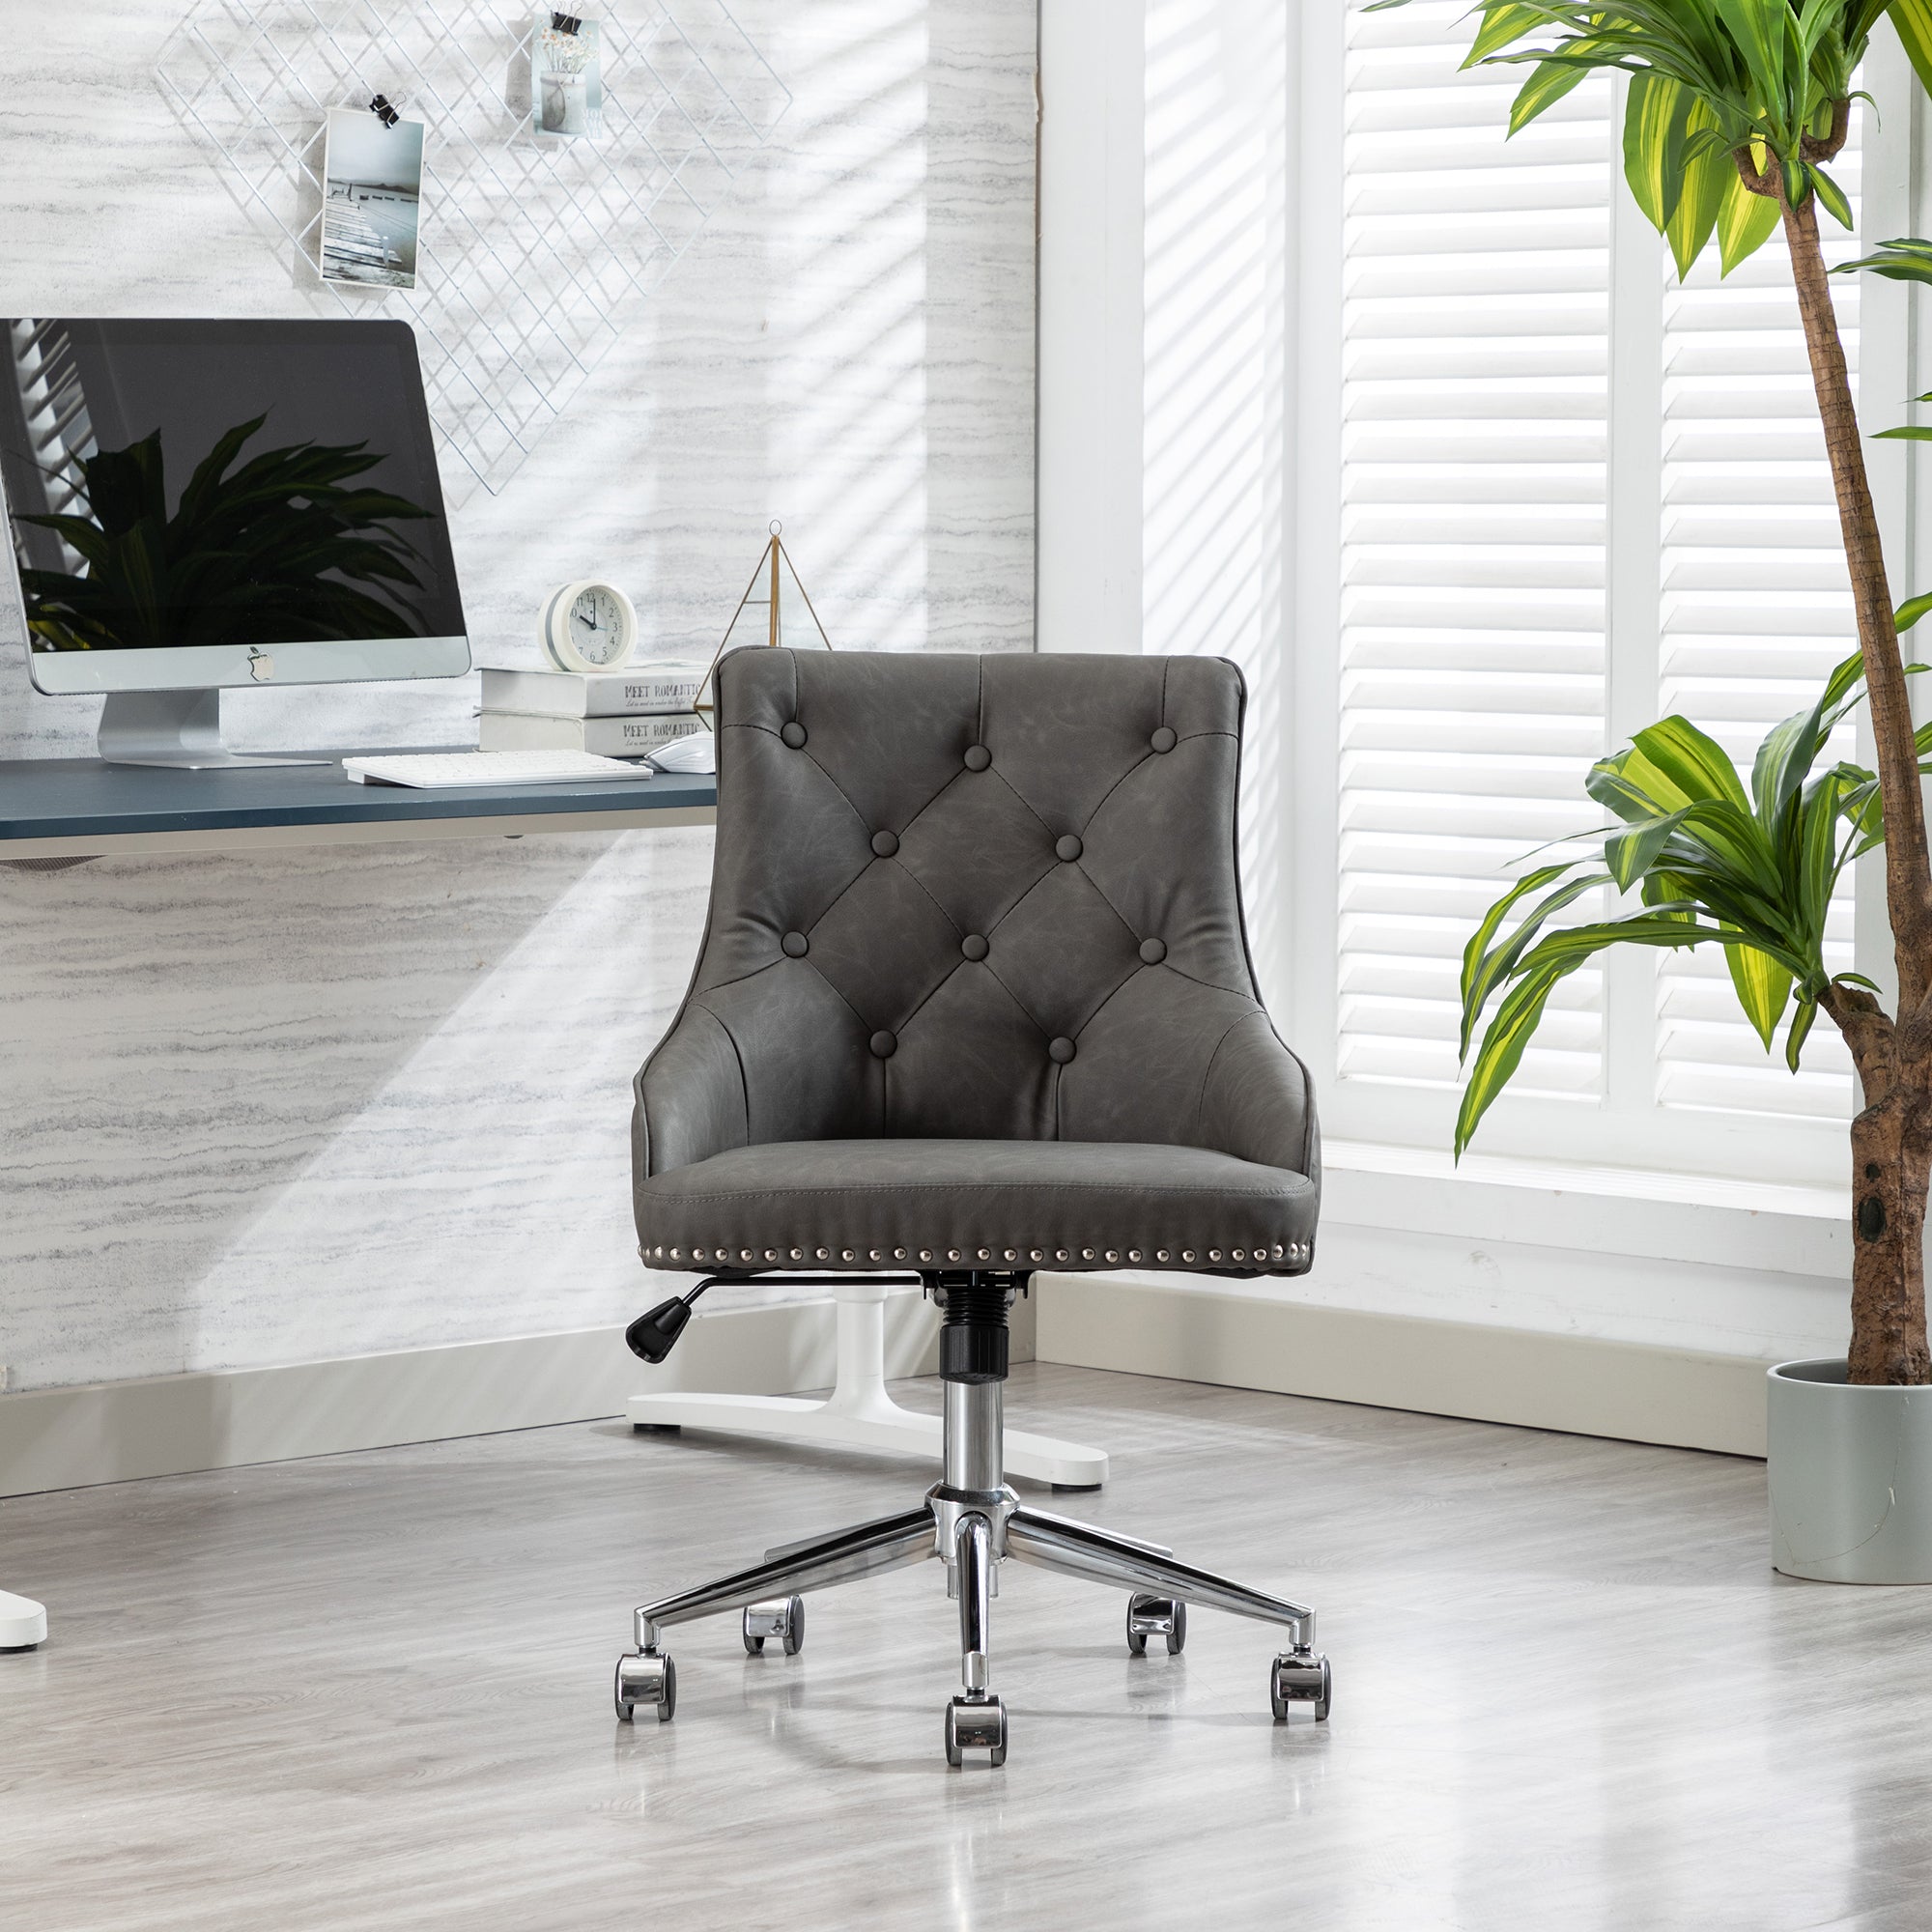 Hengming Office Chair (Gray)